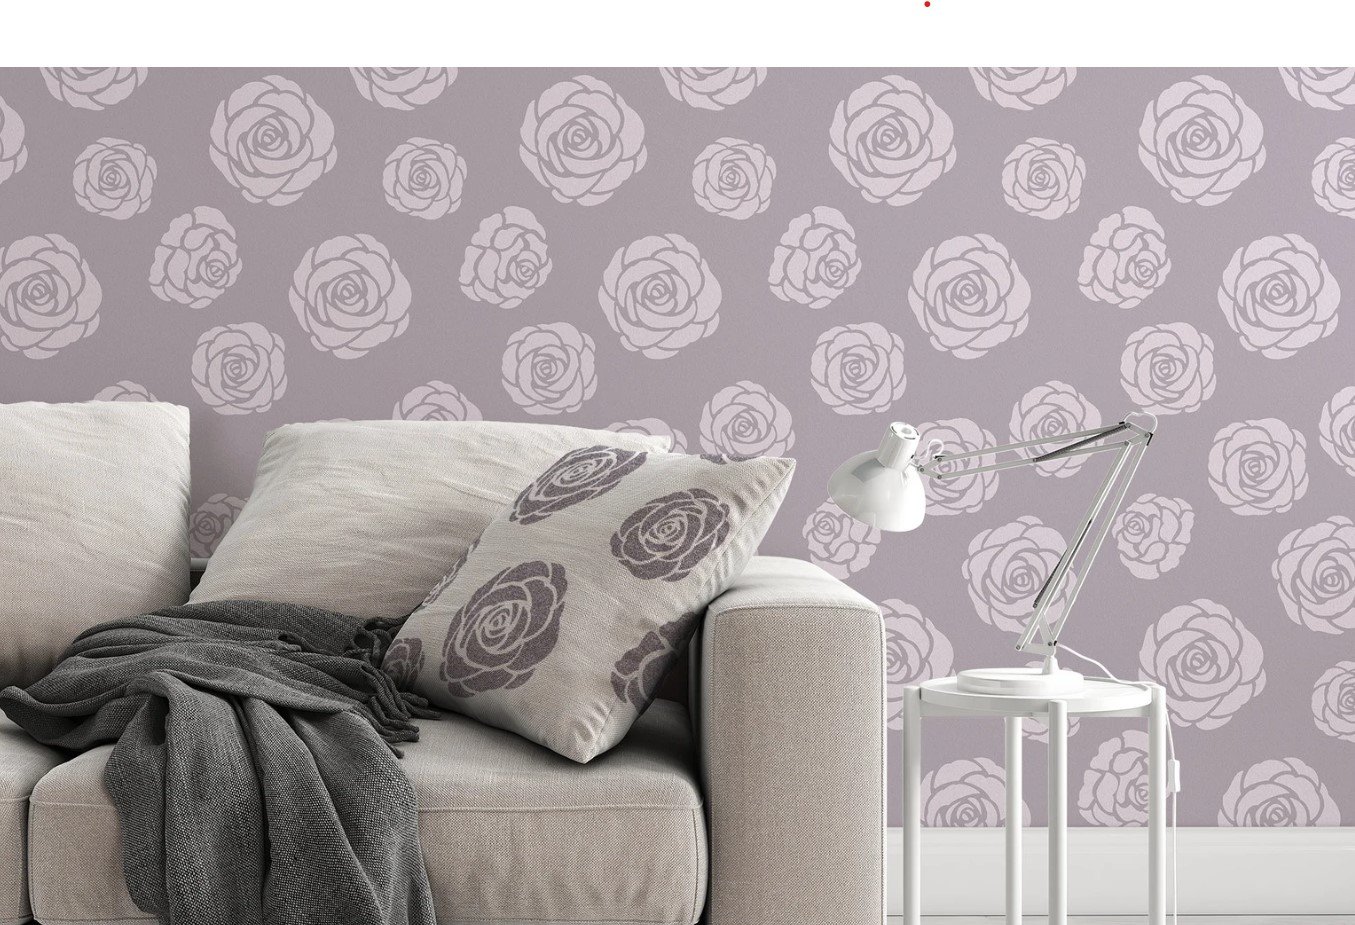 Painting Stencil Small Rose Flower Stencil - Walls Stencils, Plaster  Stencils, Painting Stencils